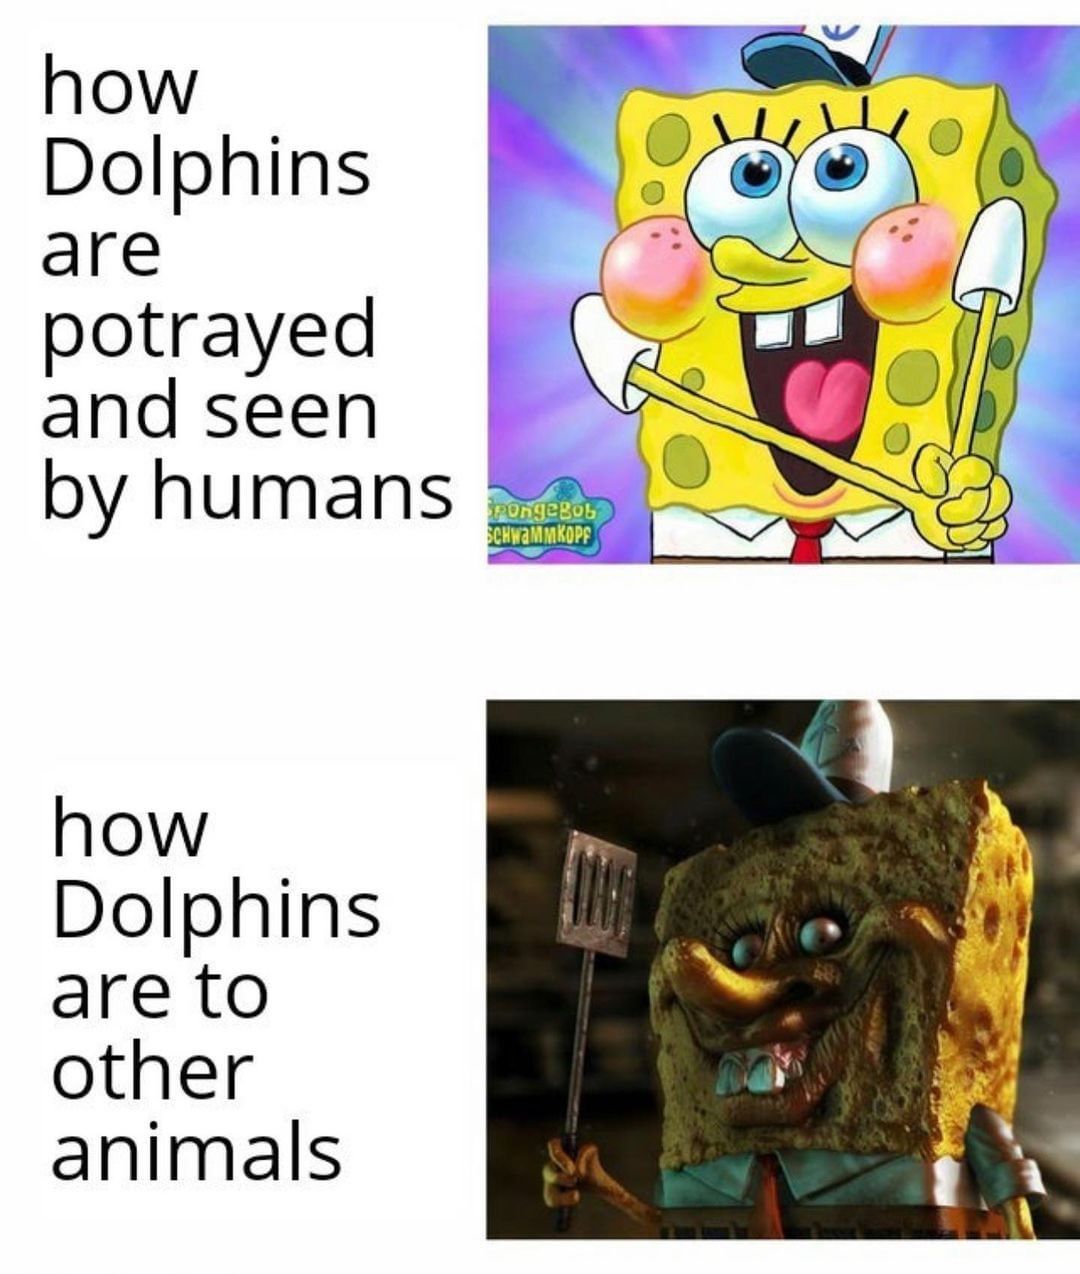 How Dolphins are potrayed and seen by humans. How Dolphins are to other animals.